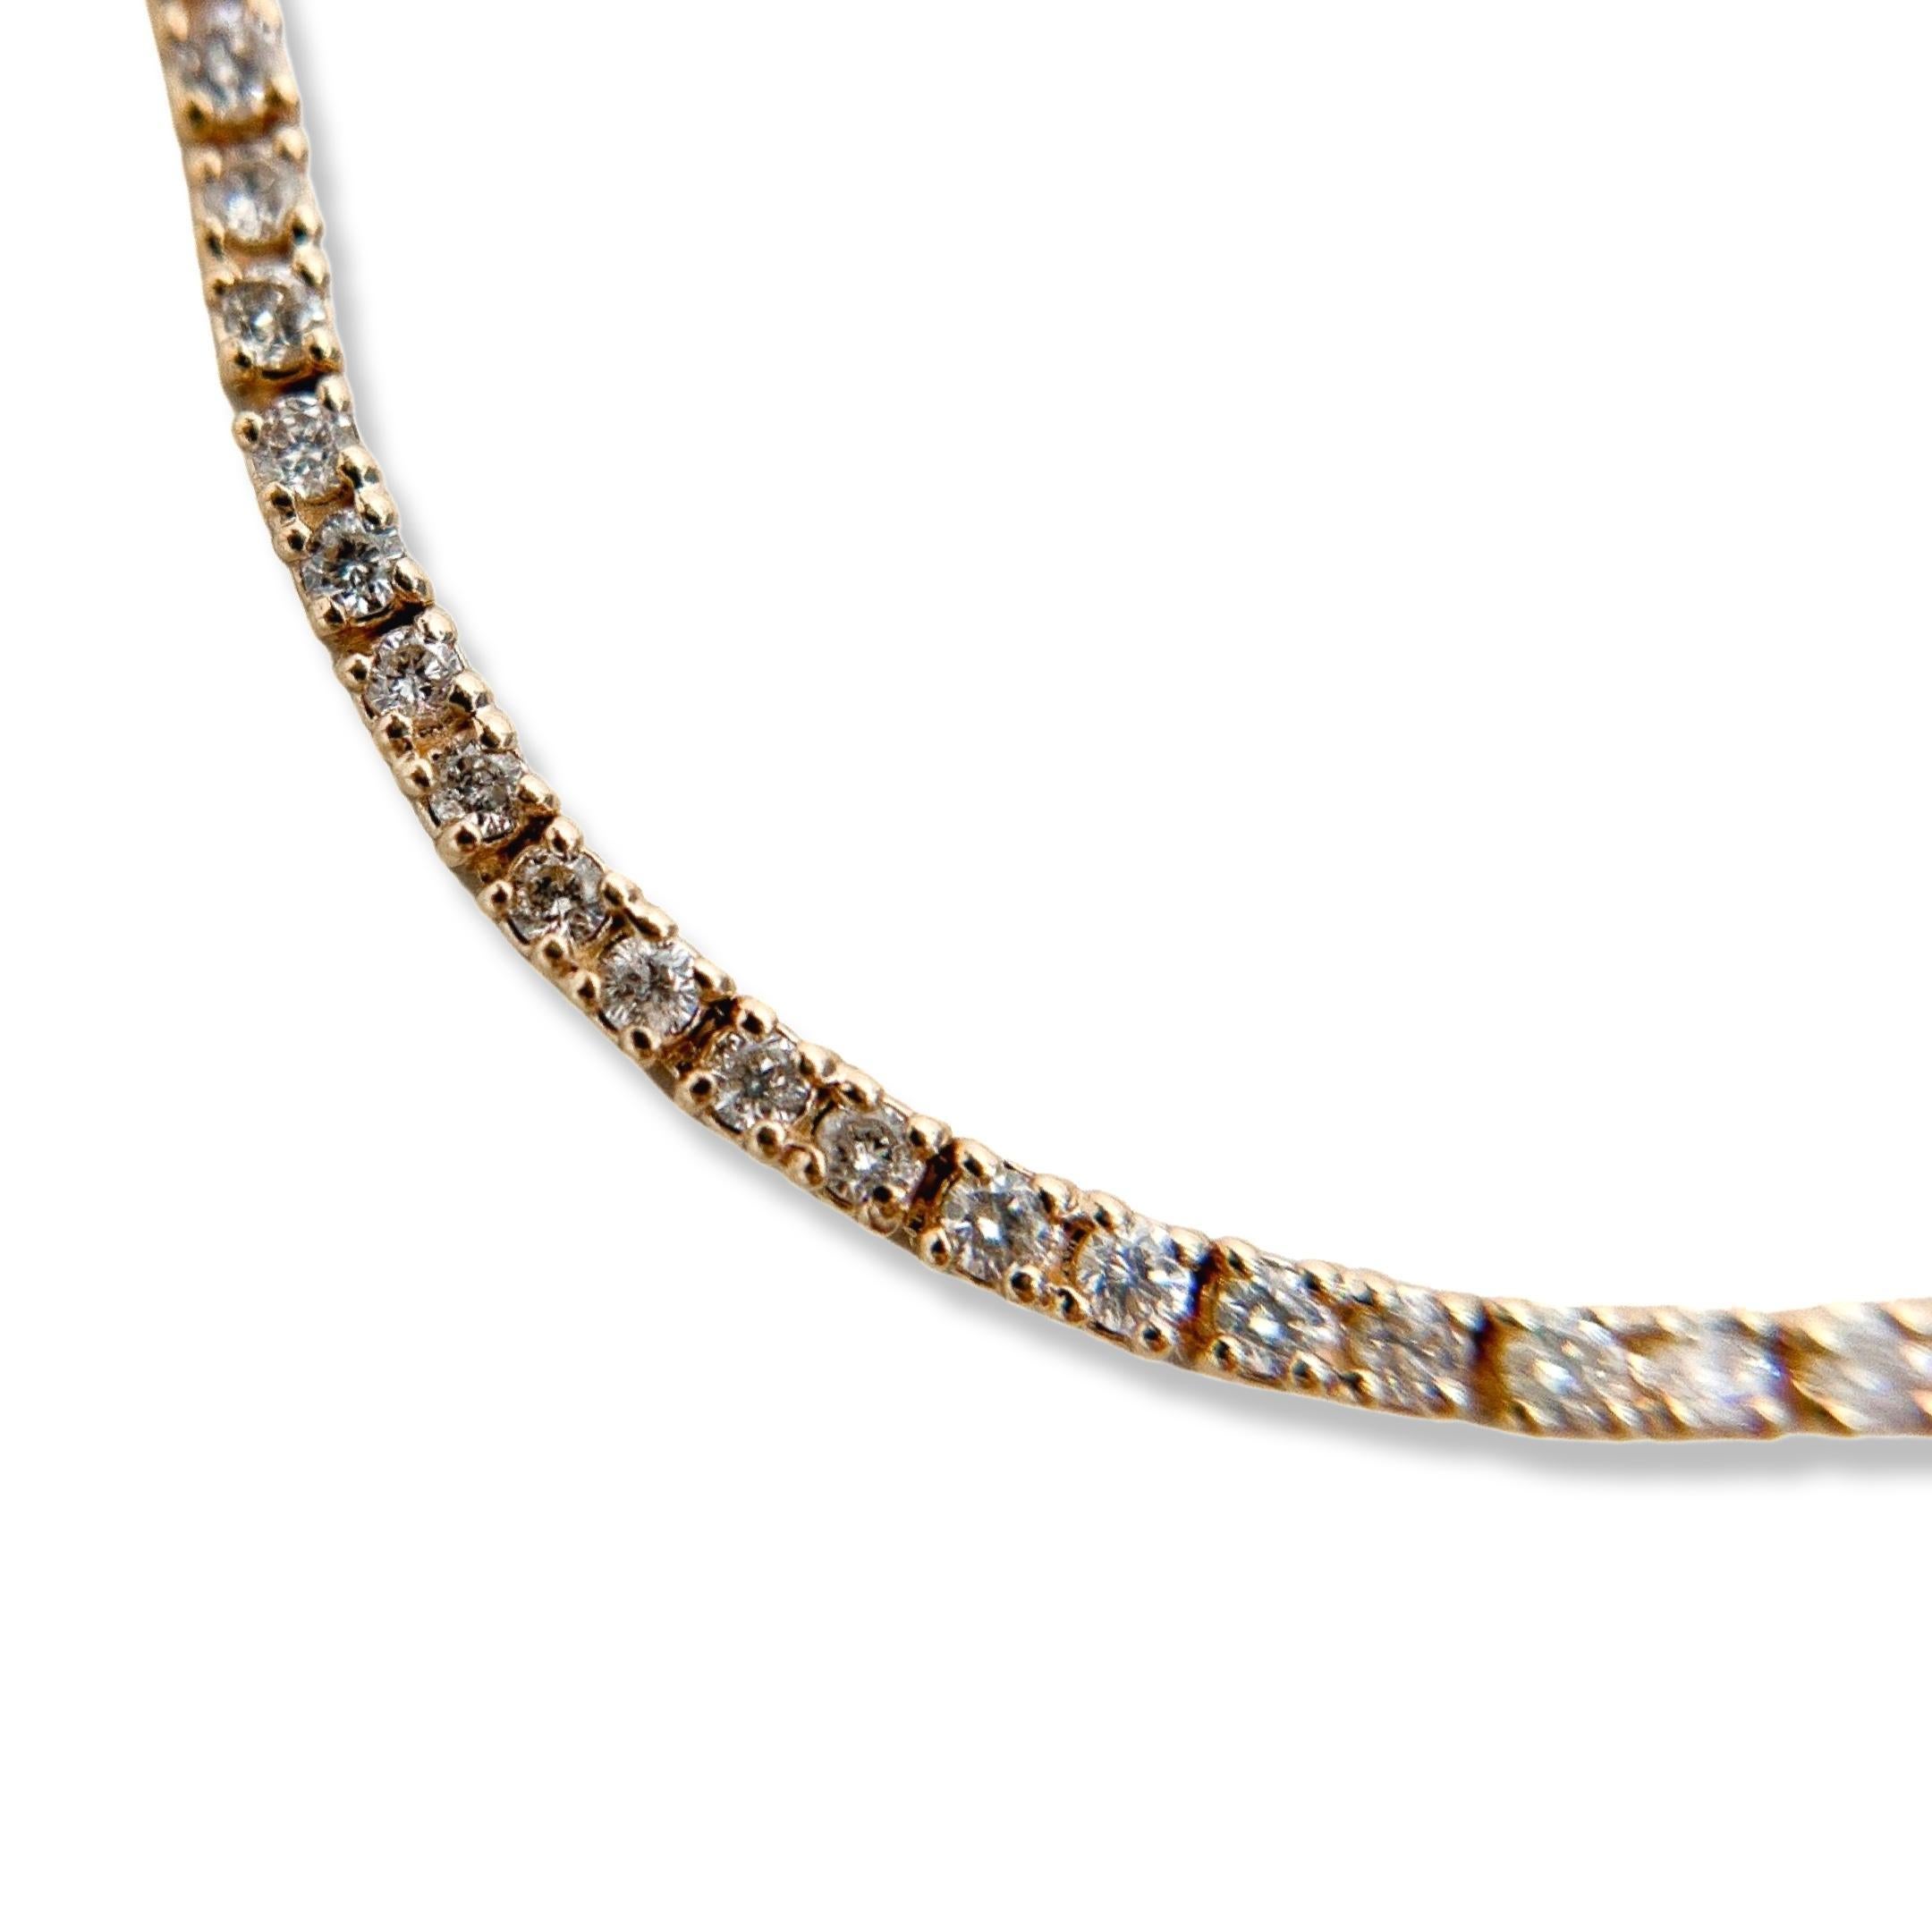 Elevate your style with this 14K yellow gold necklace featuring a stunning 4.4ct diamond. This necklace is a true classic, destined to become your go-to staple for every day, effortlessly elevating any outfit. The 14K gold setting exudes opulence,